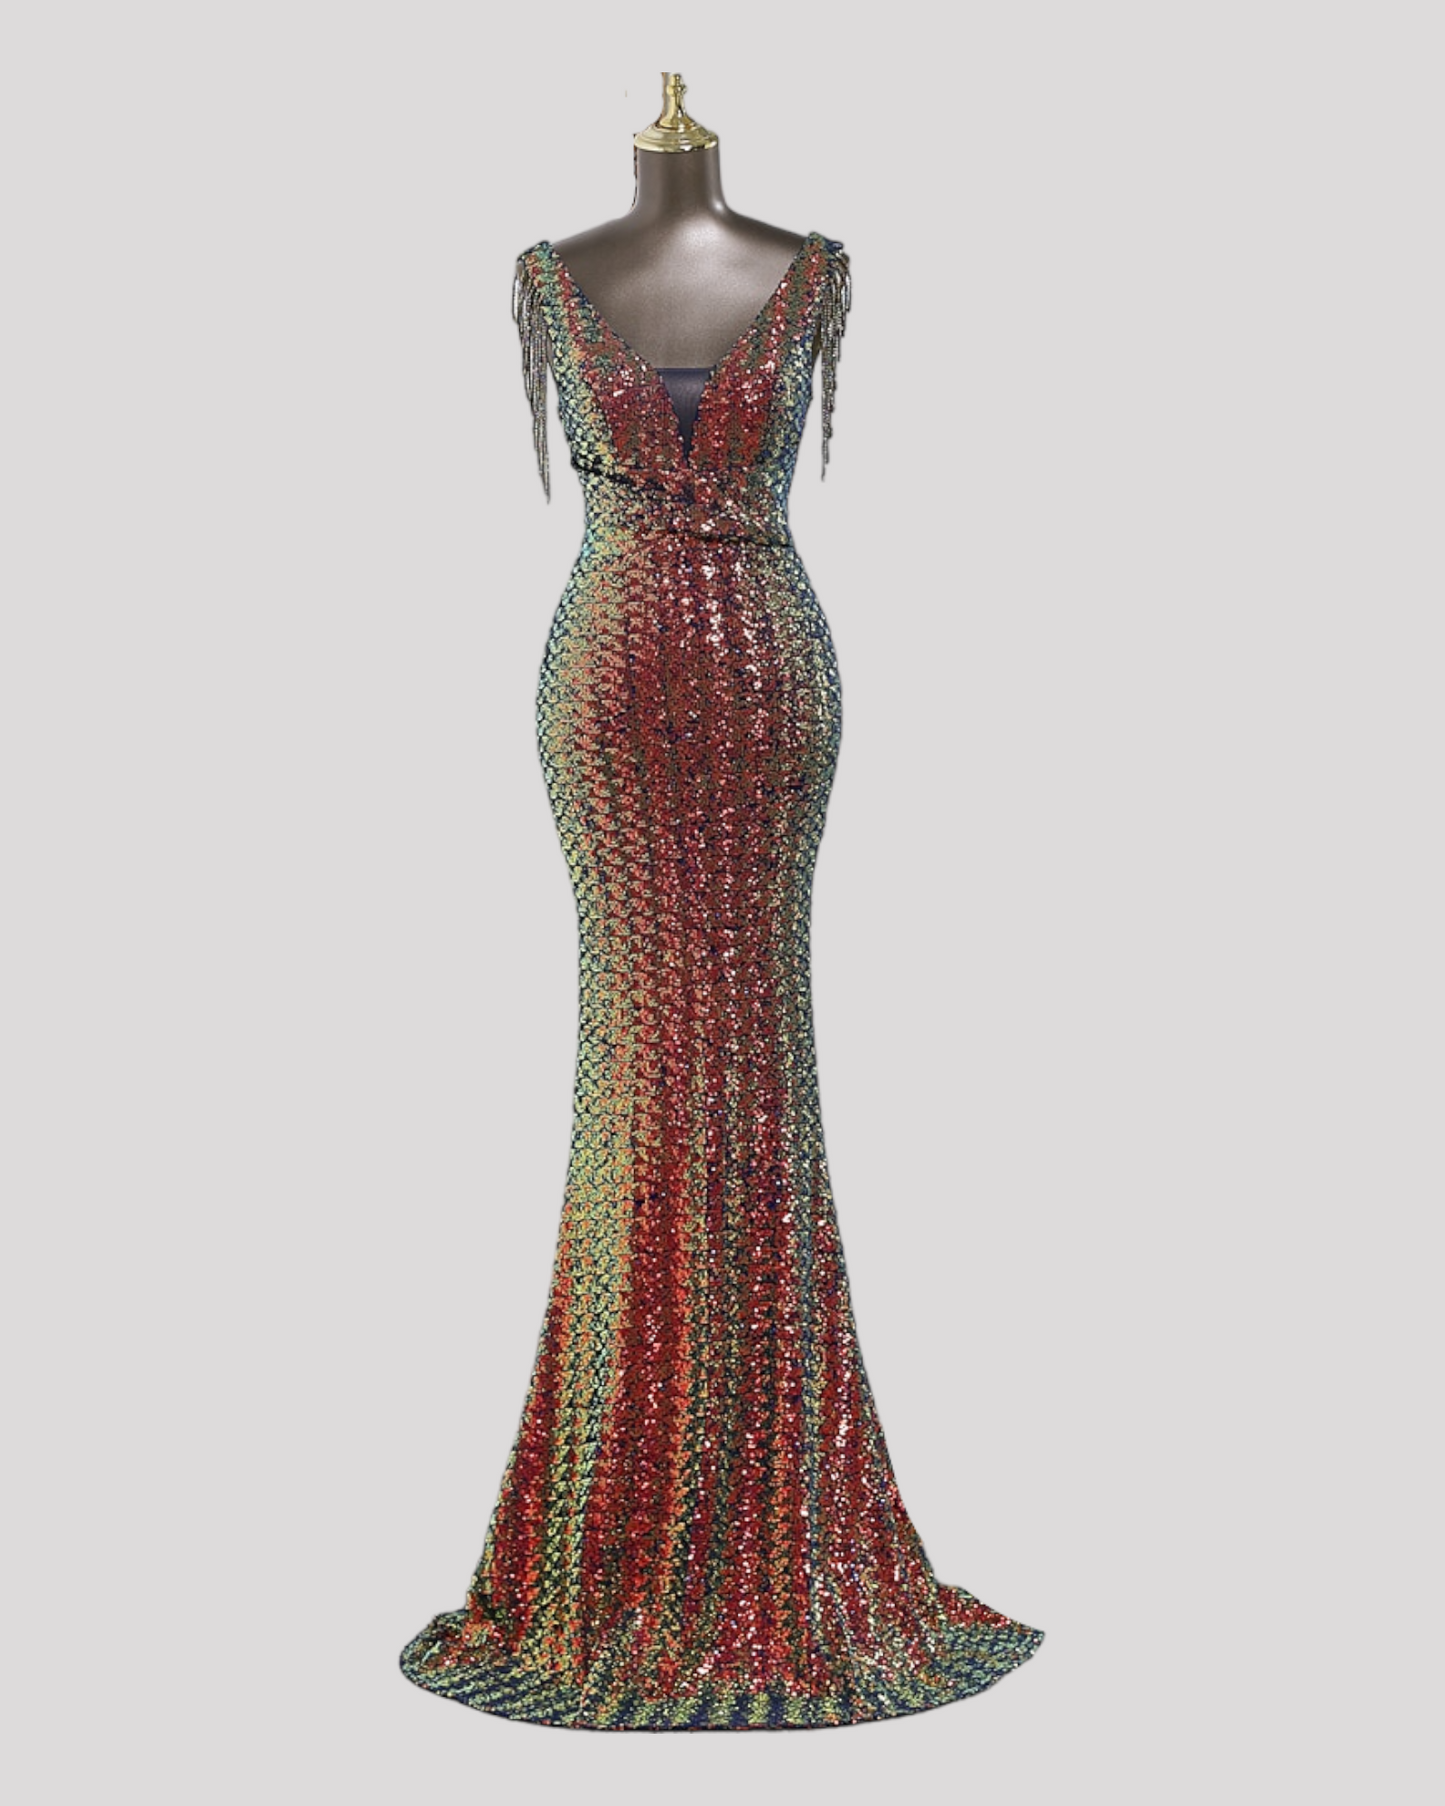 Mermaid Sequin Dress with Pleating detail over waist and Beaded illusion Sleeves